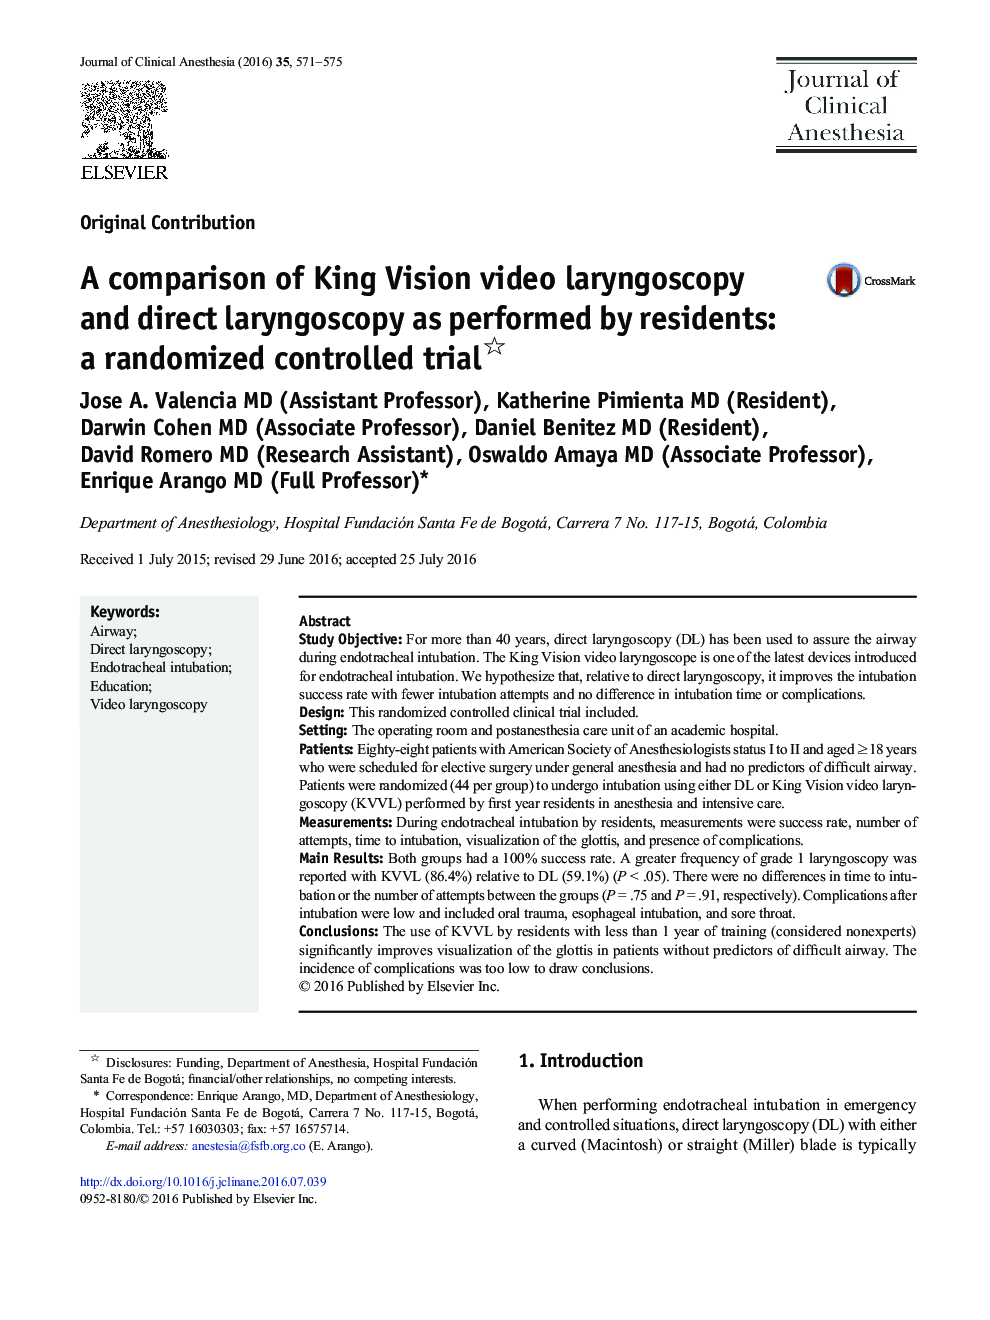 A comparison of King Vision video laryngoscopy and direct laryngoscopy as performed by residents: a randomized controlled trial